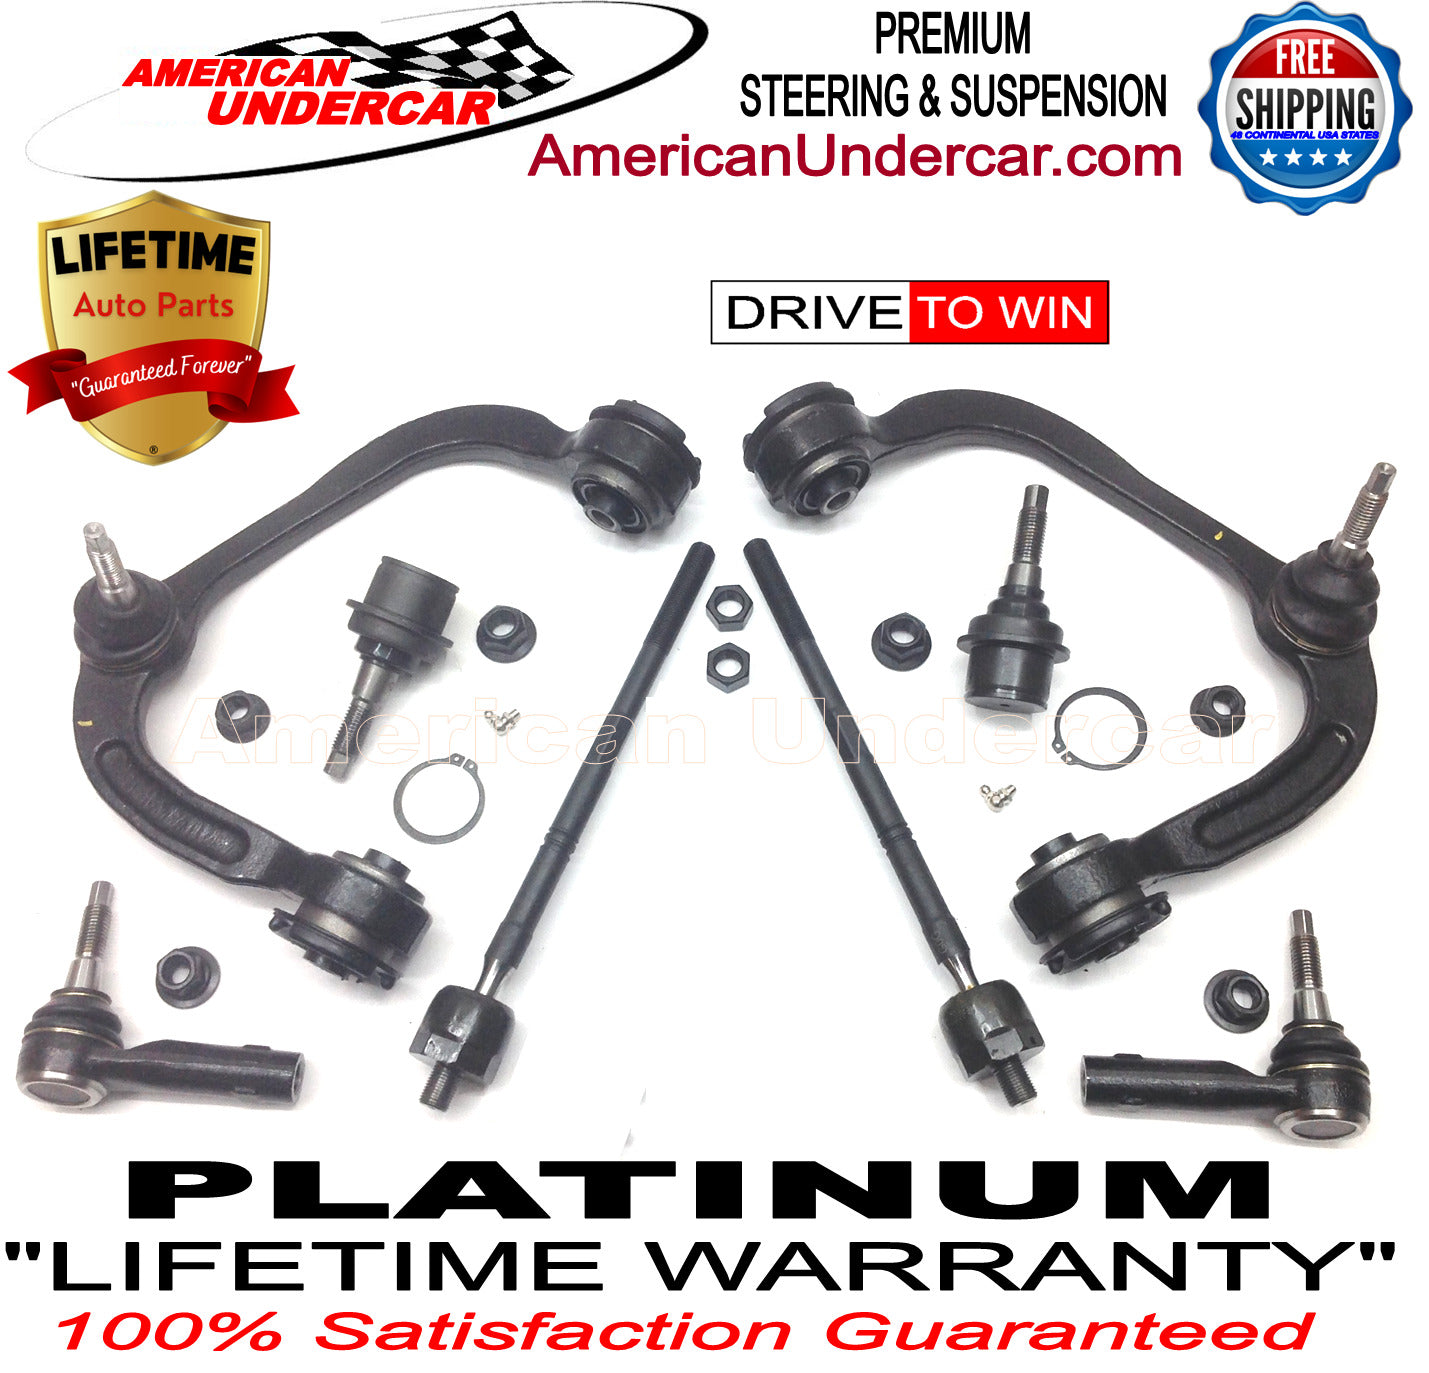 Lifetime Ball Joints Control Arms Tie Rod Steering Kit for 2004-2008 Ford F150 2WD